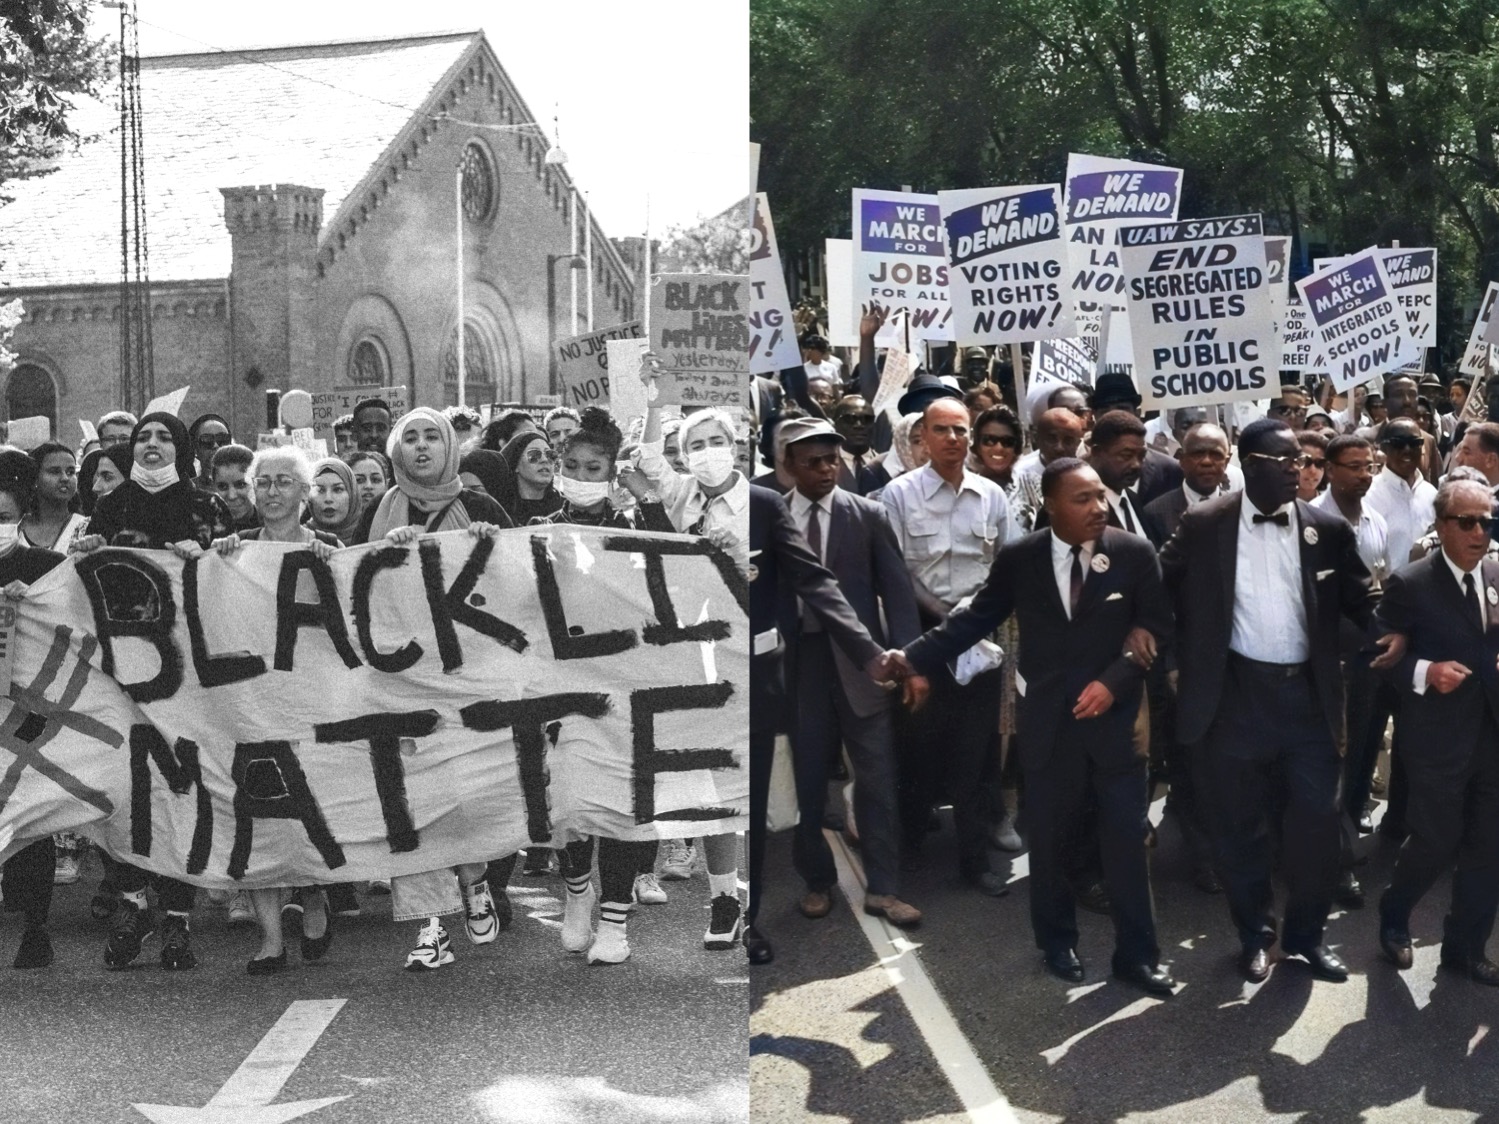 Compilation image of 2020 Black Lives Matter and 1963 March on Washington protest